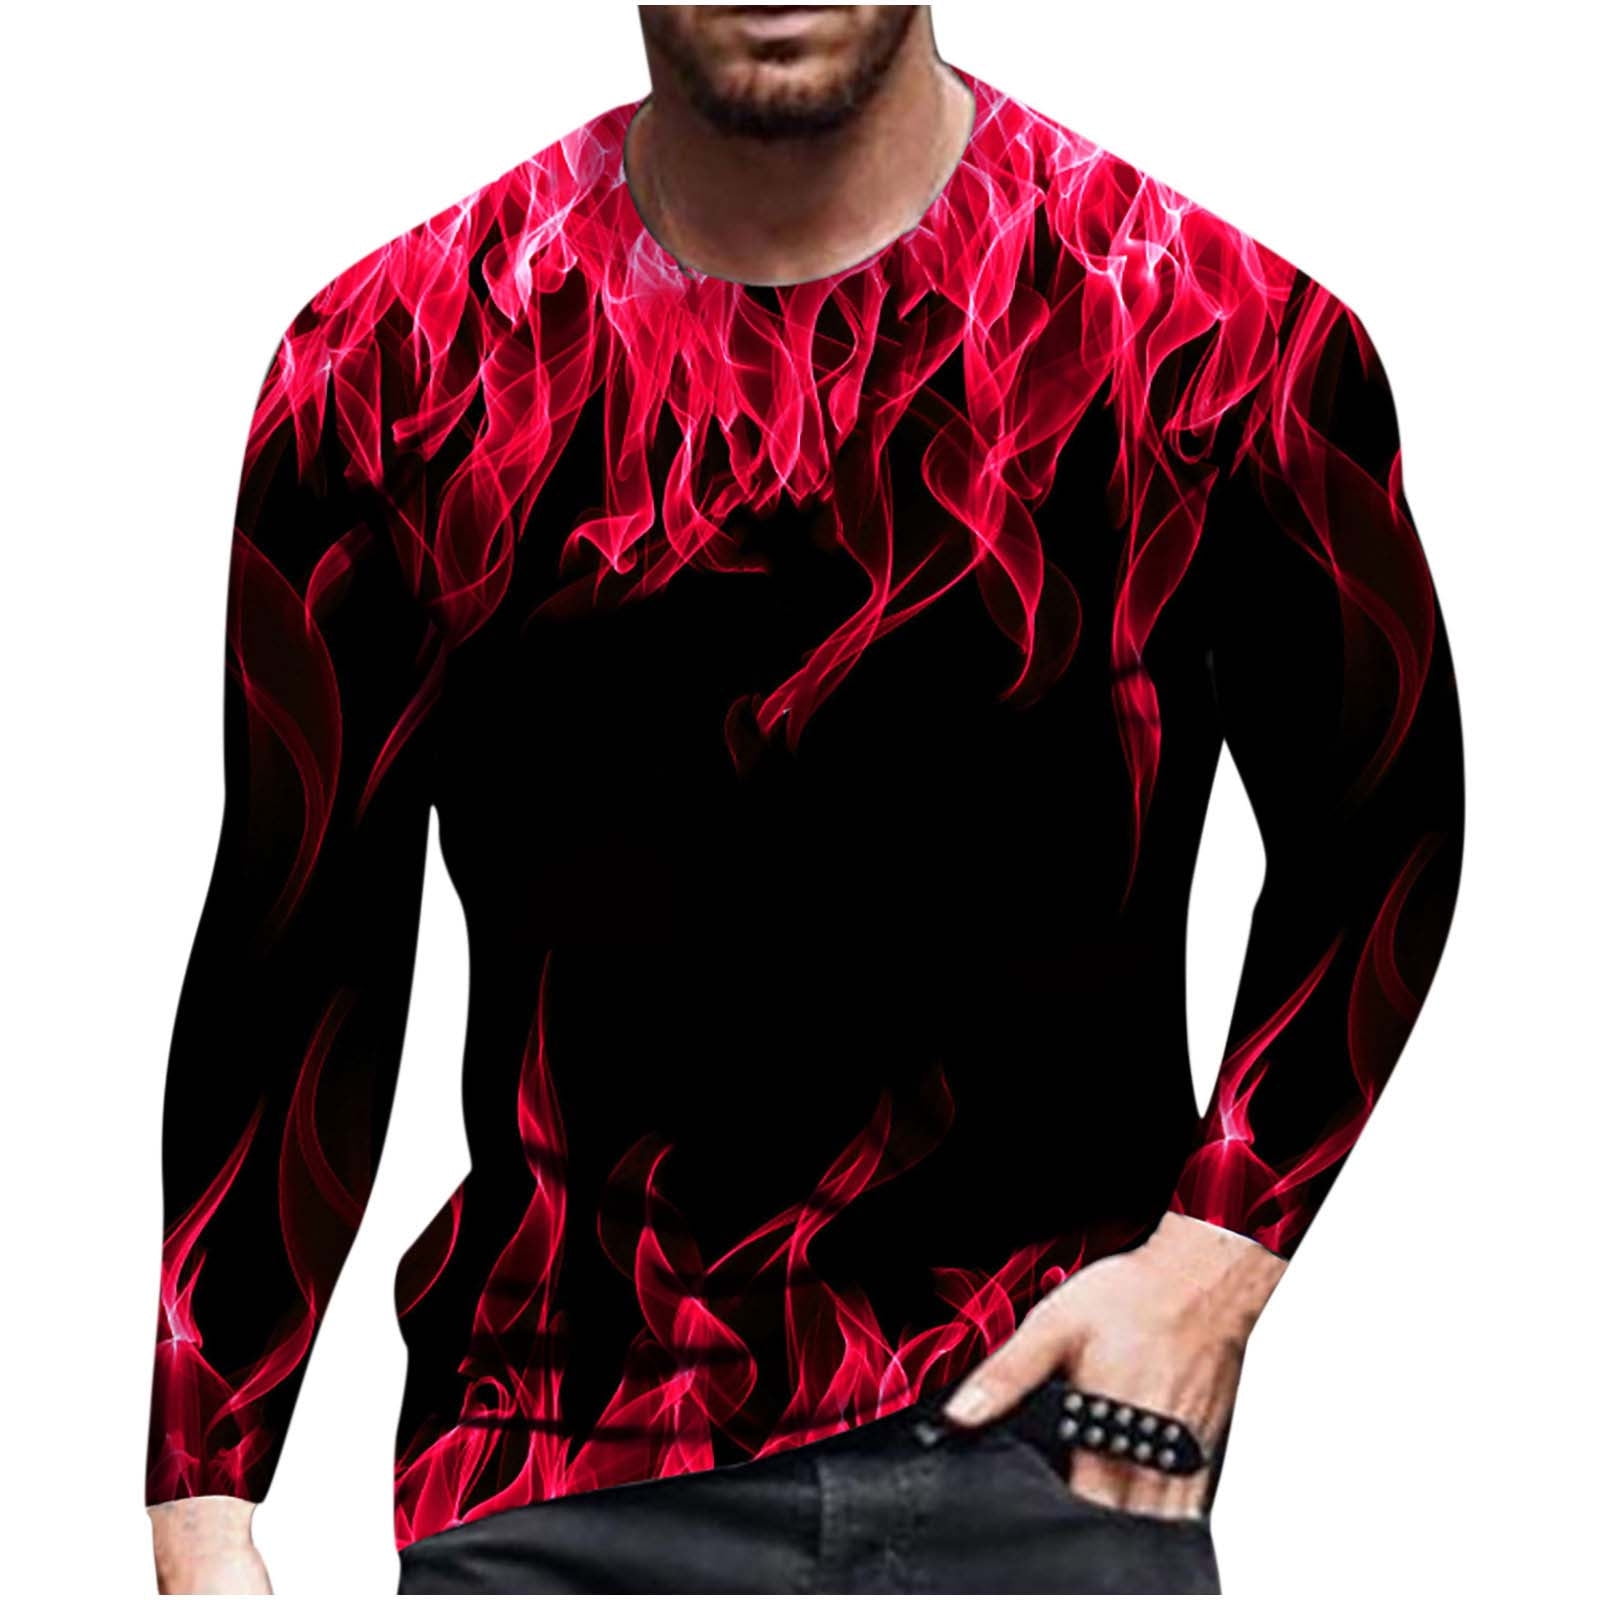 Outfmvch Men's Fashion Casual 3D Digital Printing Muscle Exercise